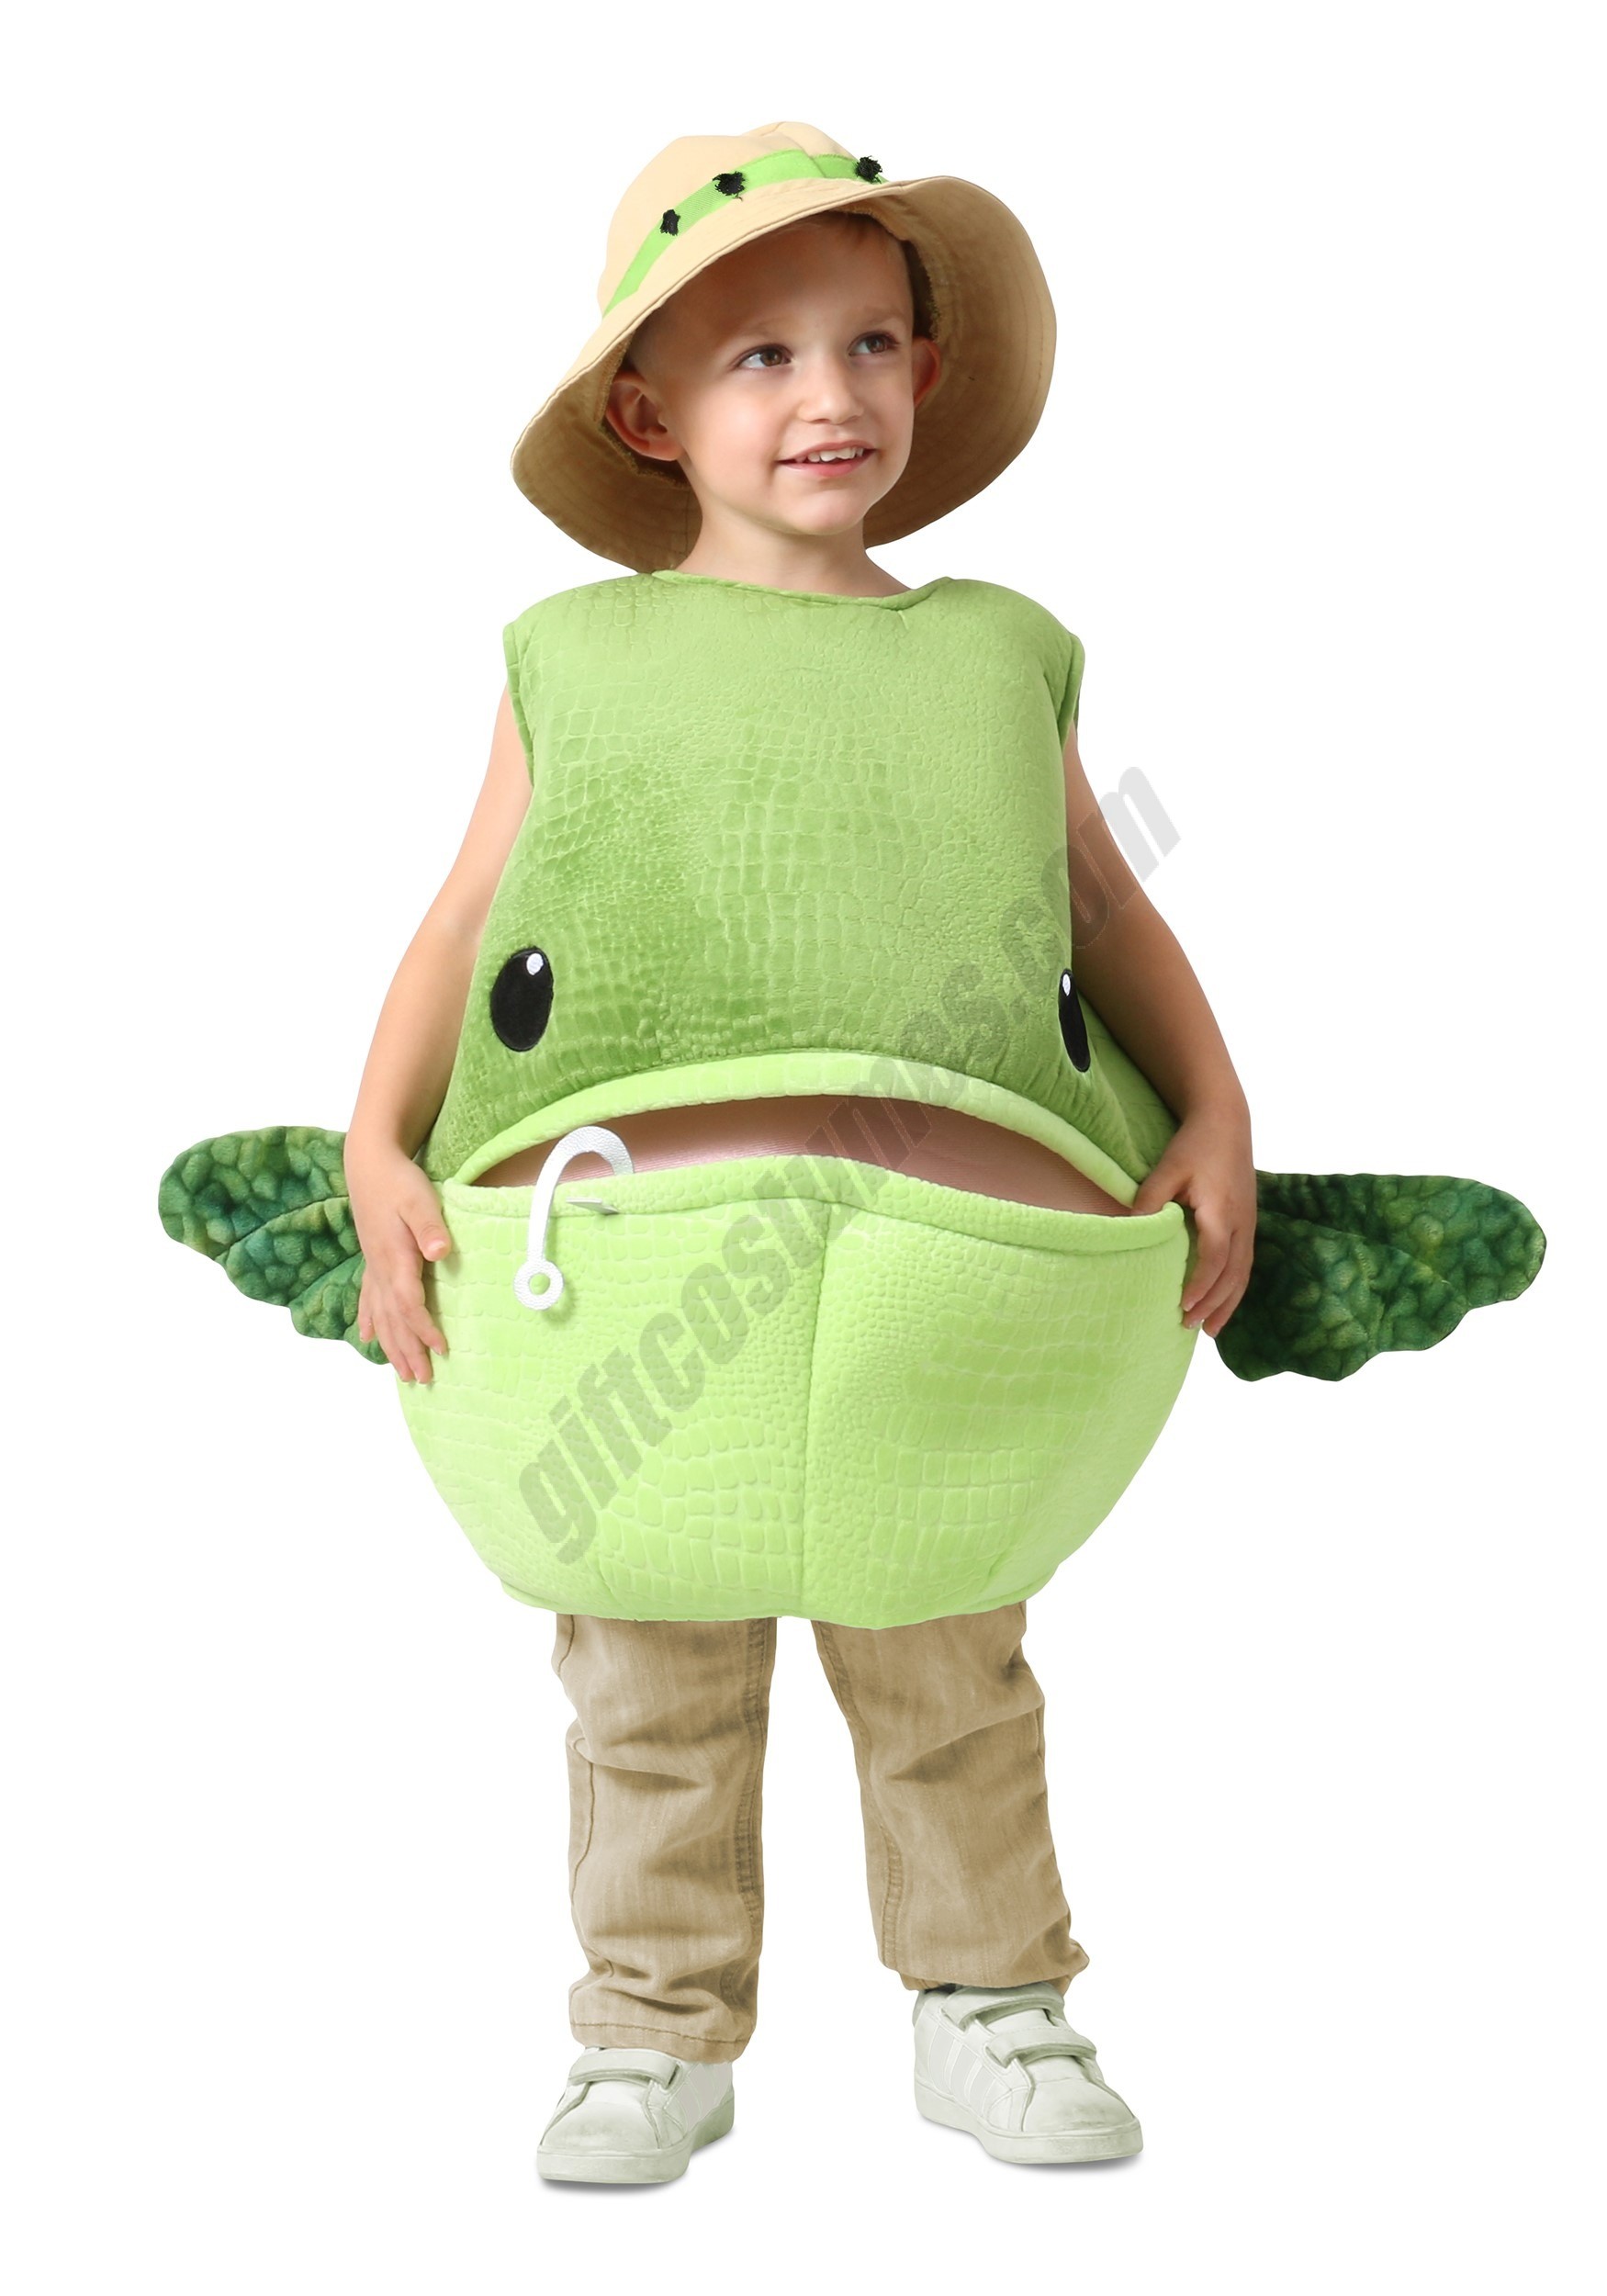 Feed Me Bass Costume for Kids Promotions - Feed Me Bass Costume for Kids Promotions